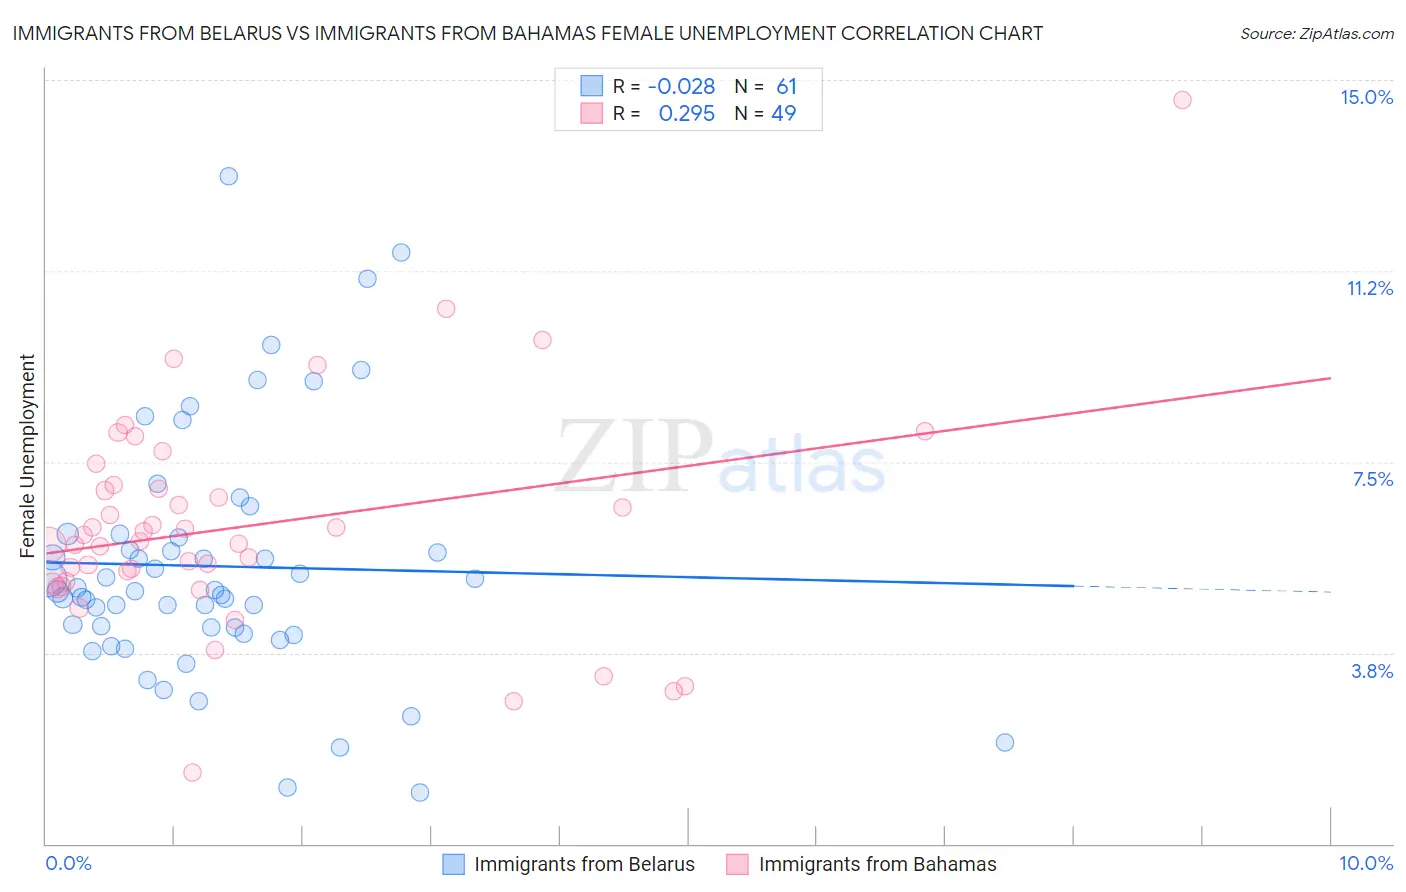 Immigrants from Belarus vs Immigrants from Bahamas Female Unemployment